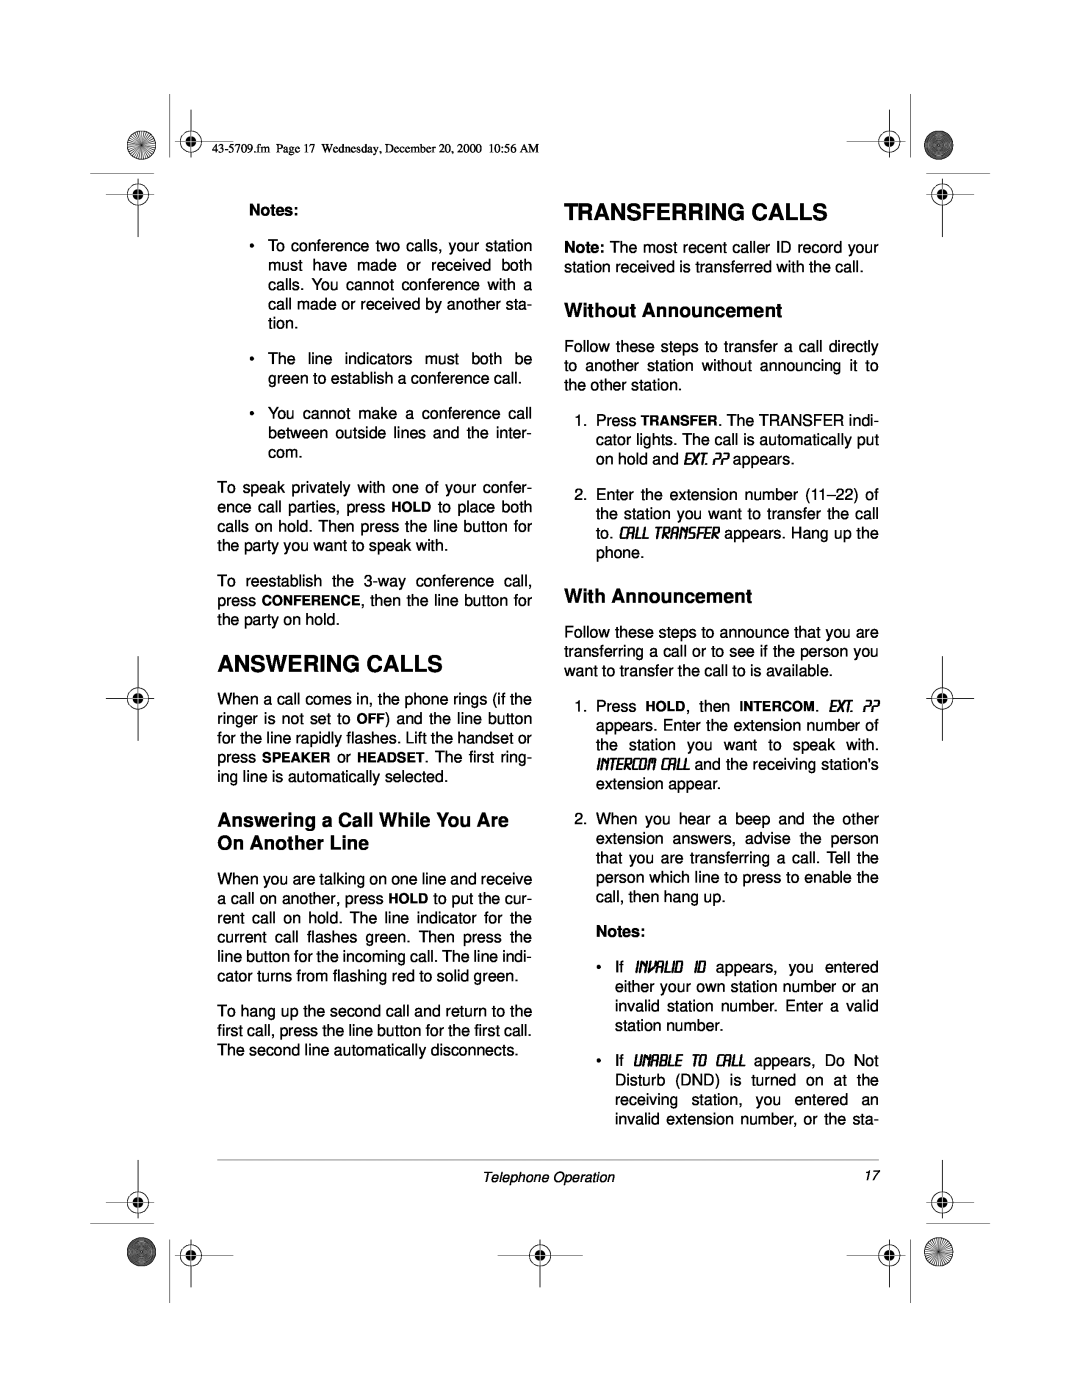 Radio Shack 4-Line Telephone System with Speakerphone and Caller ID Answering Calls, Transferring Calls, With Announcement 